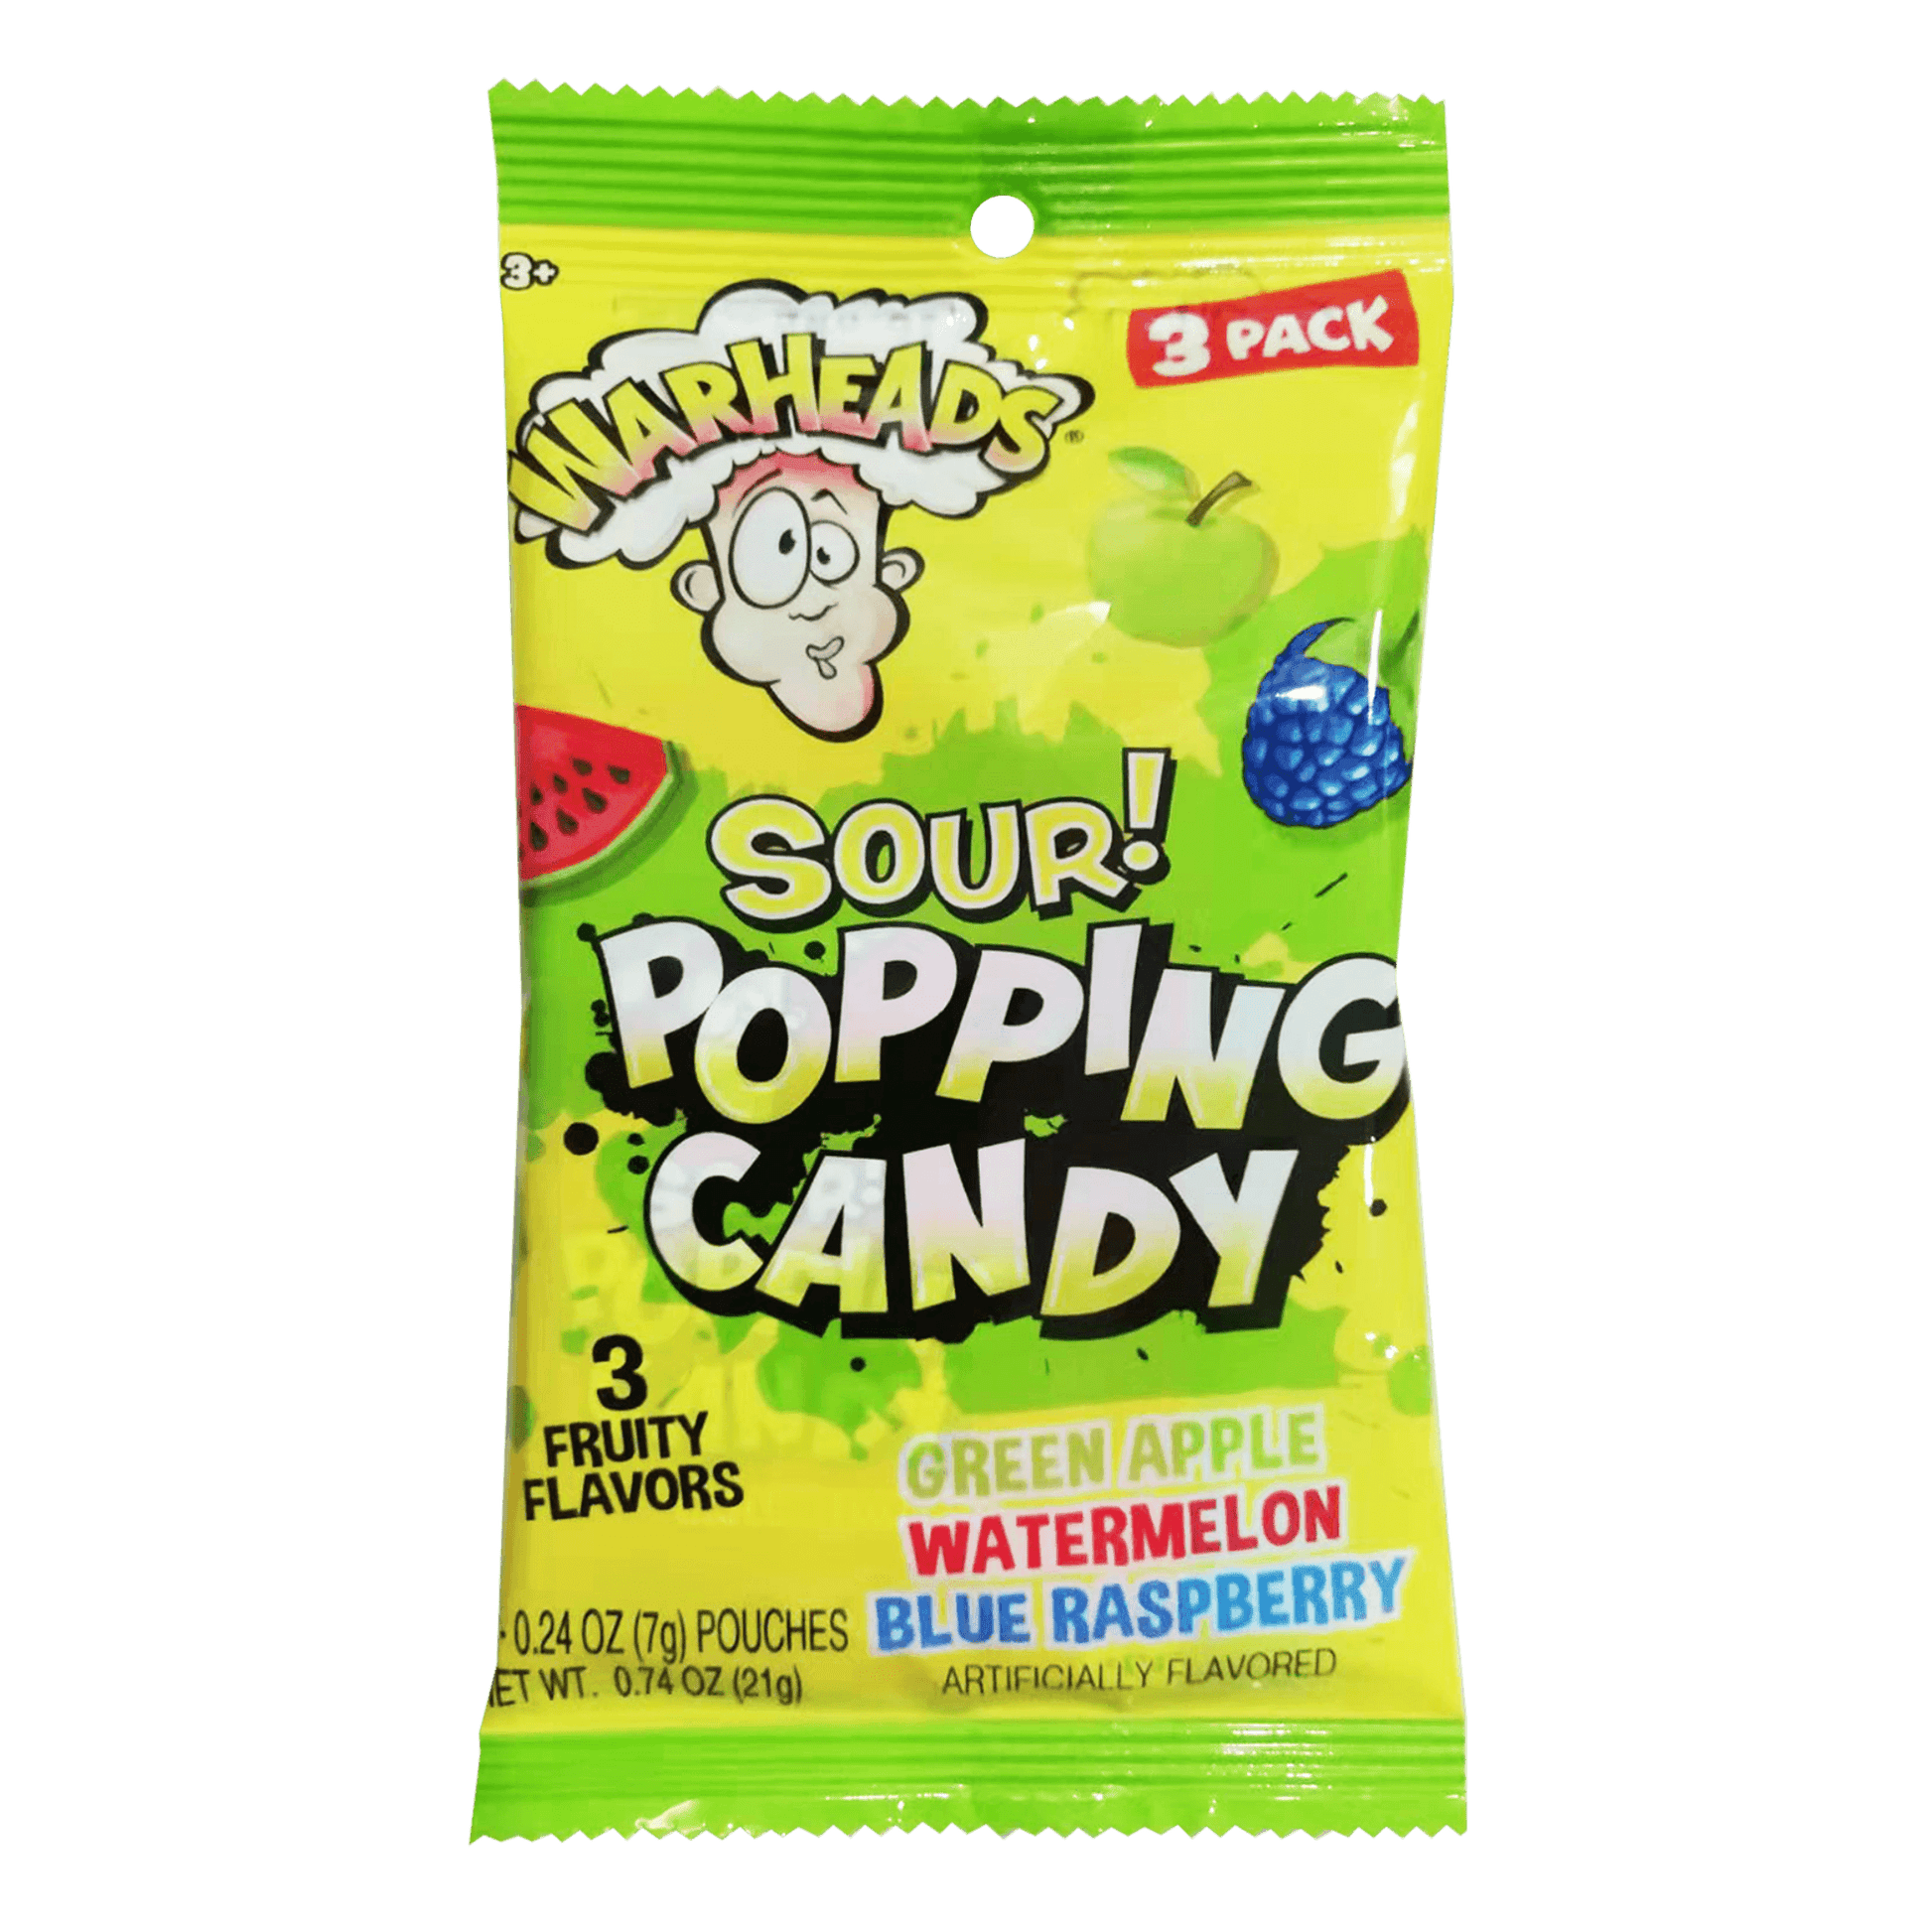 Warheads | Sour Popping Candy 3 Pack (21g) - Sour Candy - Scran.ie